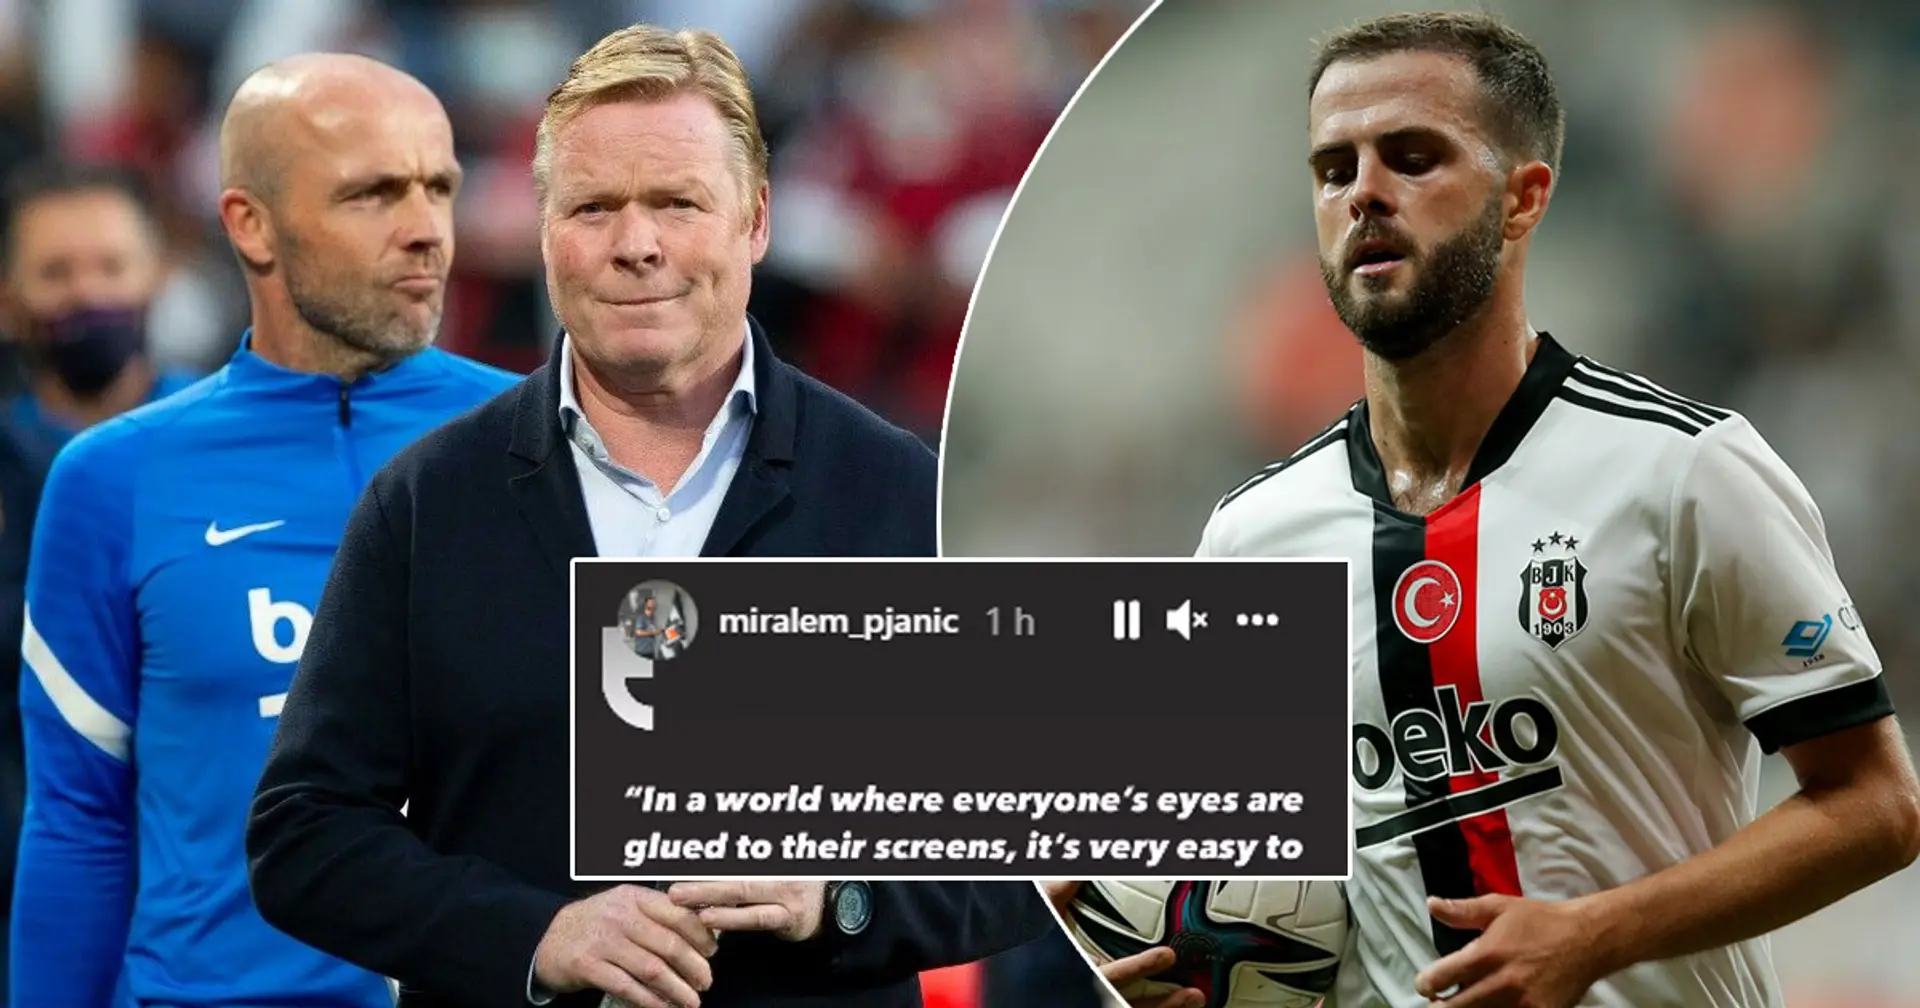 Pjanic clarifies 'letting s*** go' comments were not directed at Ronald Koeman 